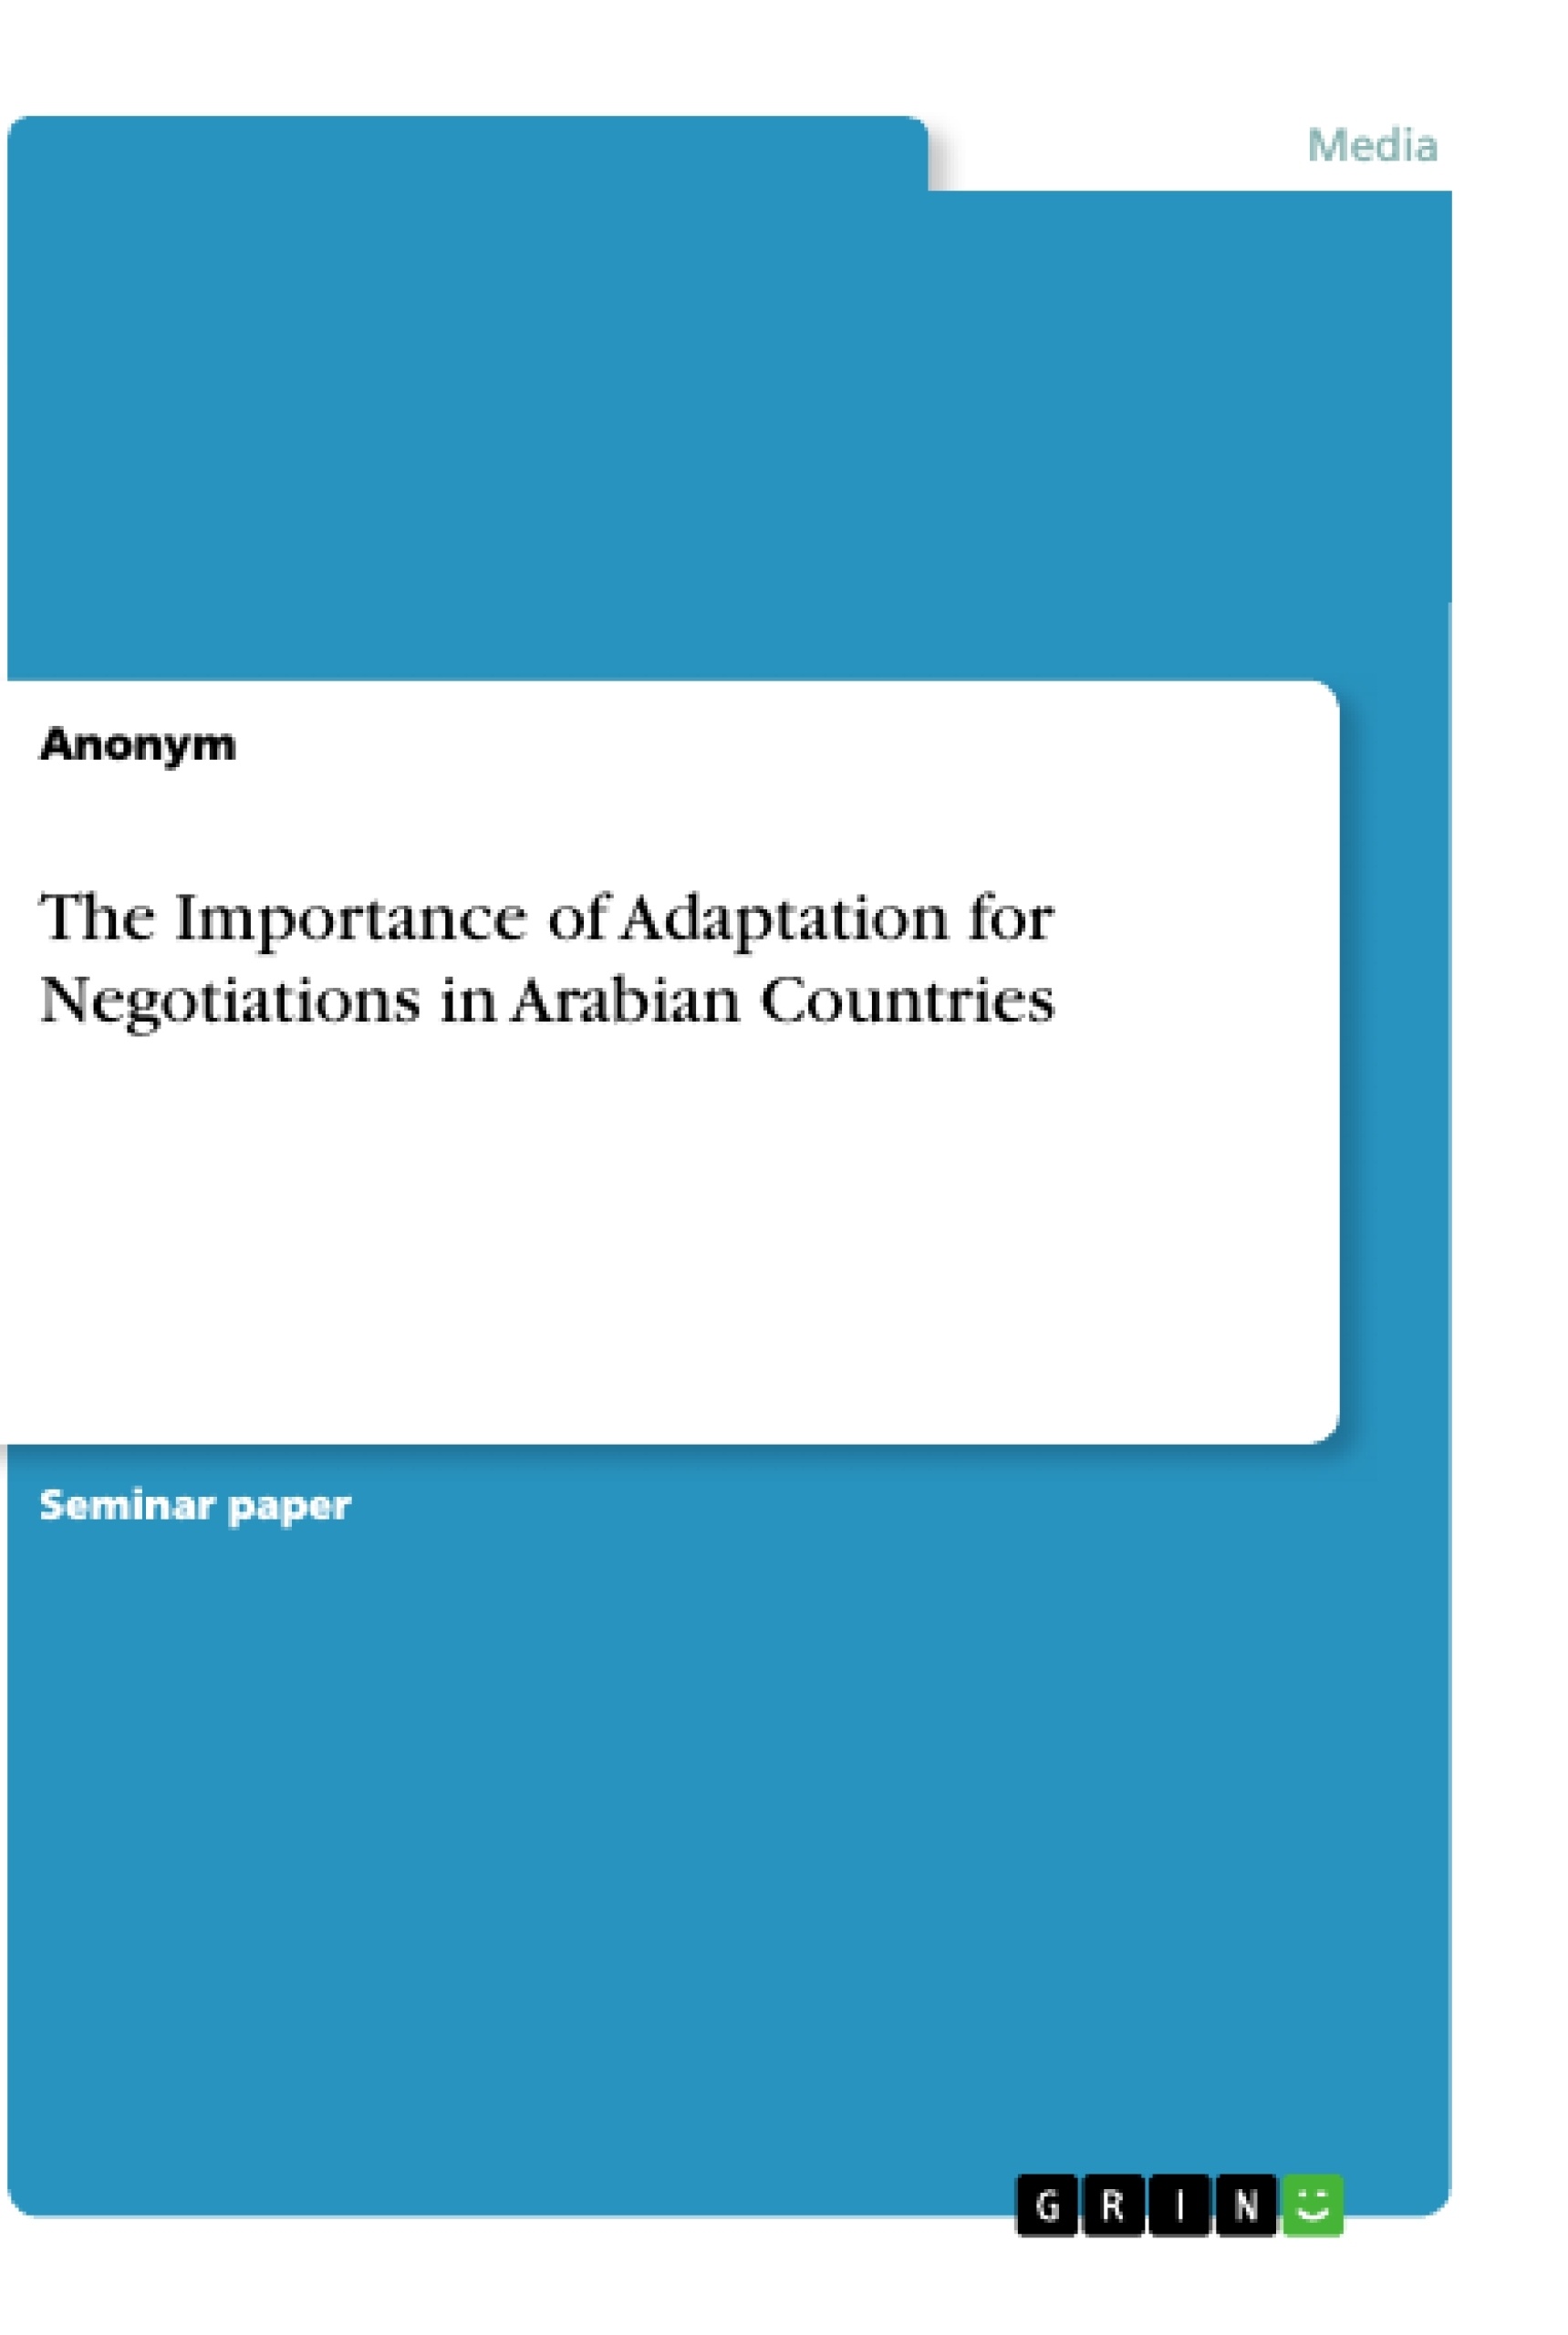 Title: The Importance of Adaptation for Negotiations in Arabian Countries